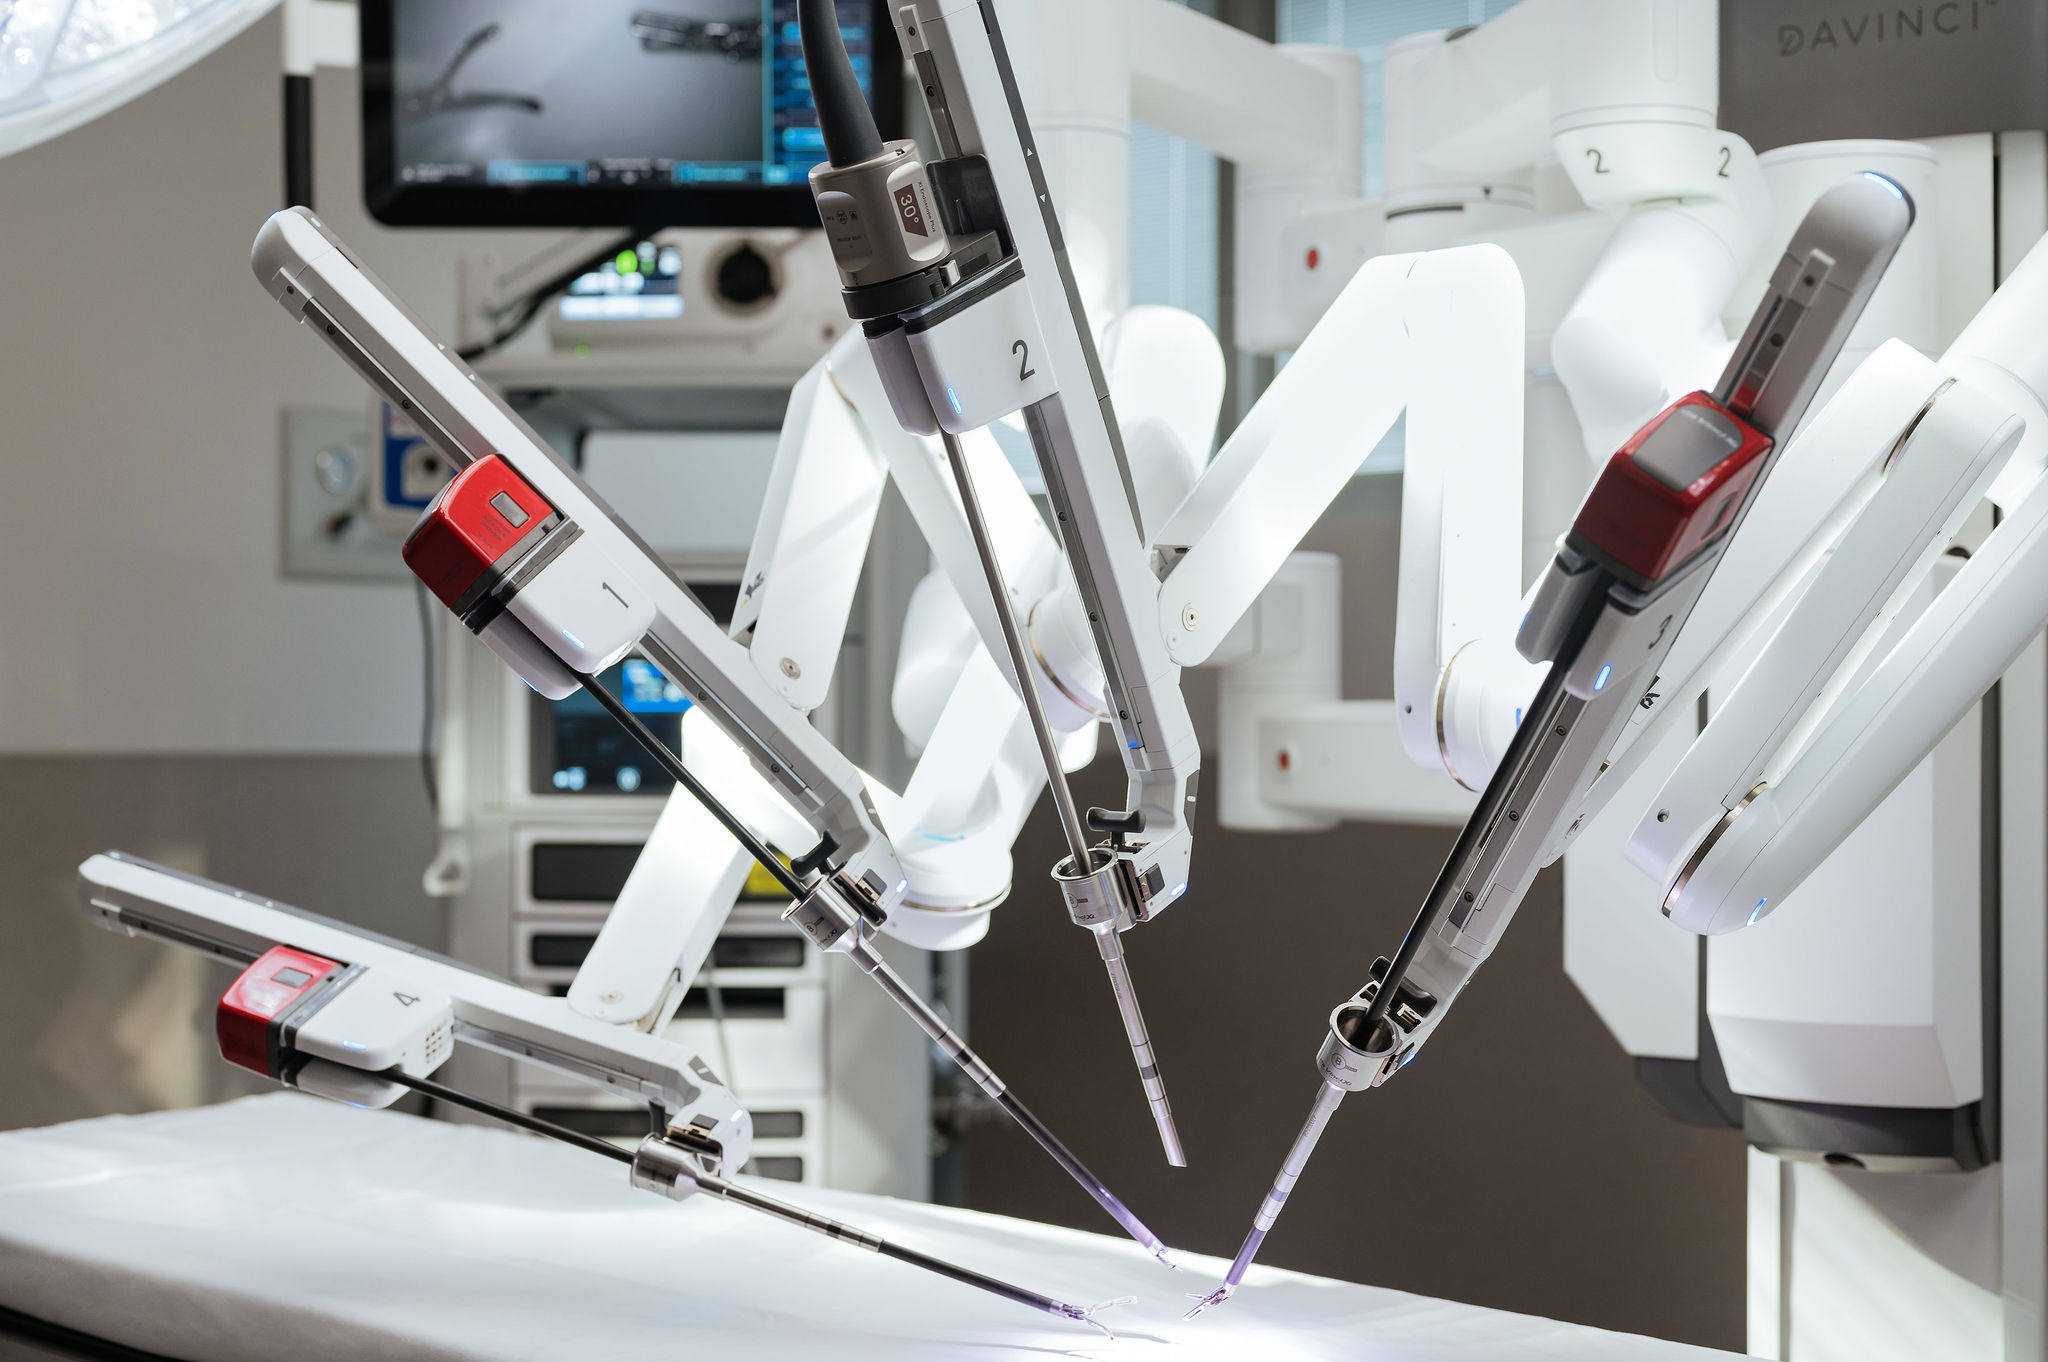 An example of the davinci surgical robot. The four arms of the device are focused on the surgery table, and in the background a visual display console can be seen. No one is in the room.